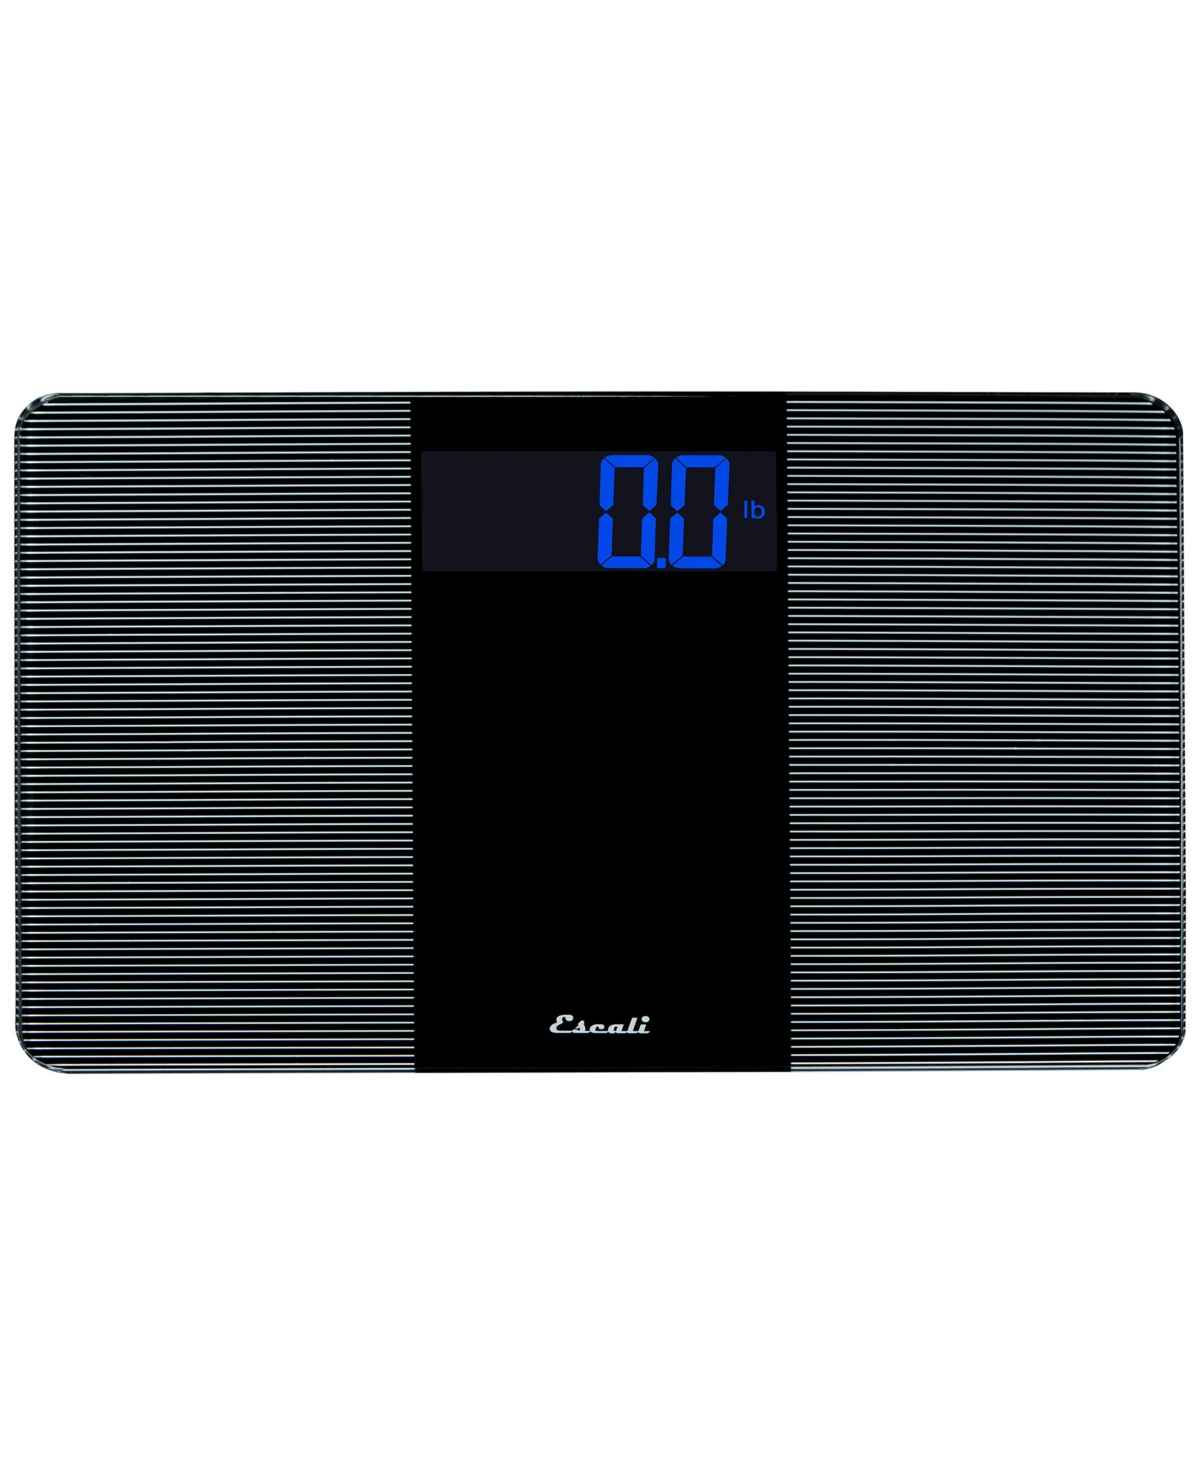 Corp Extra Wide Bathroom Scale, 400lb